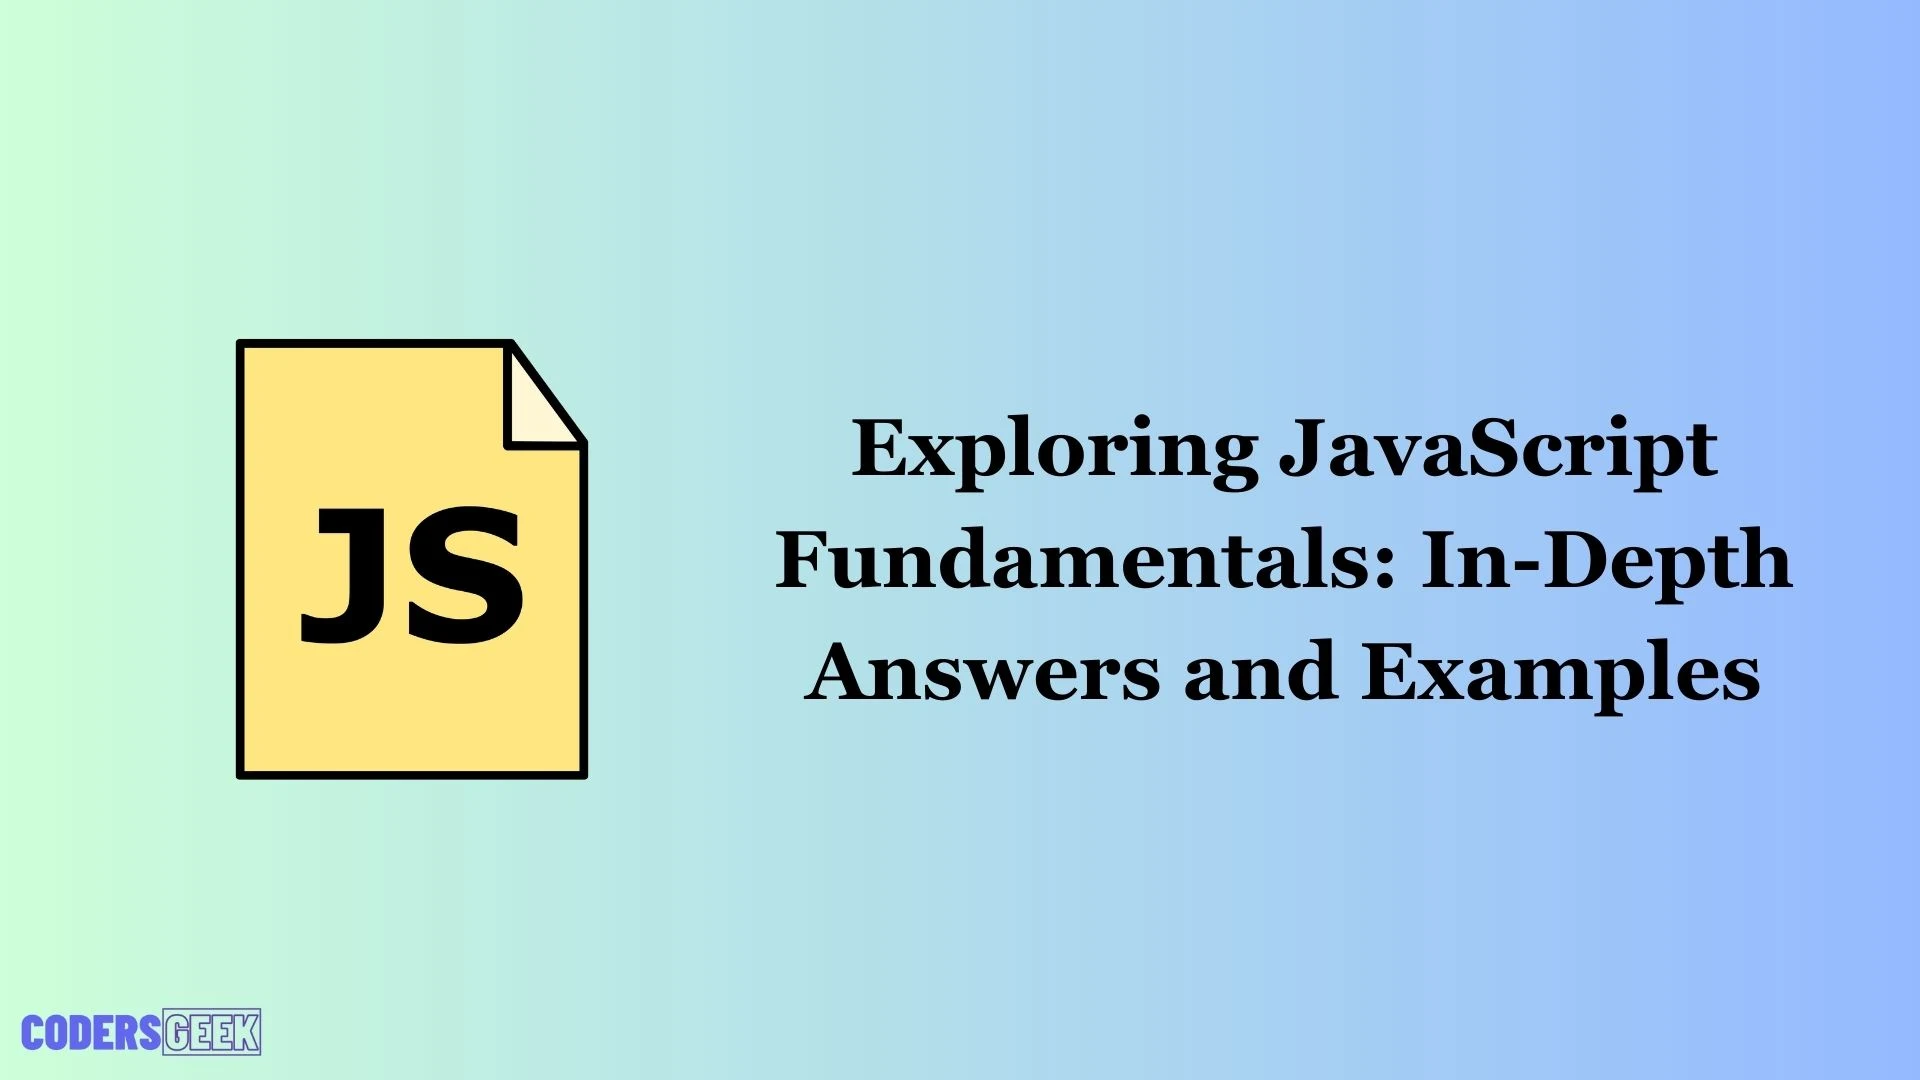 Exploring JavaScript Fundamentals: In-Depth Answers and Examples